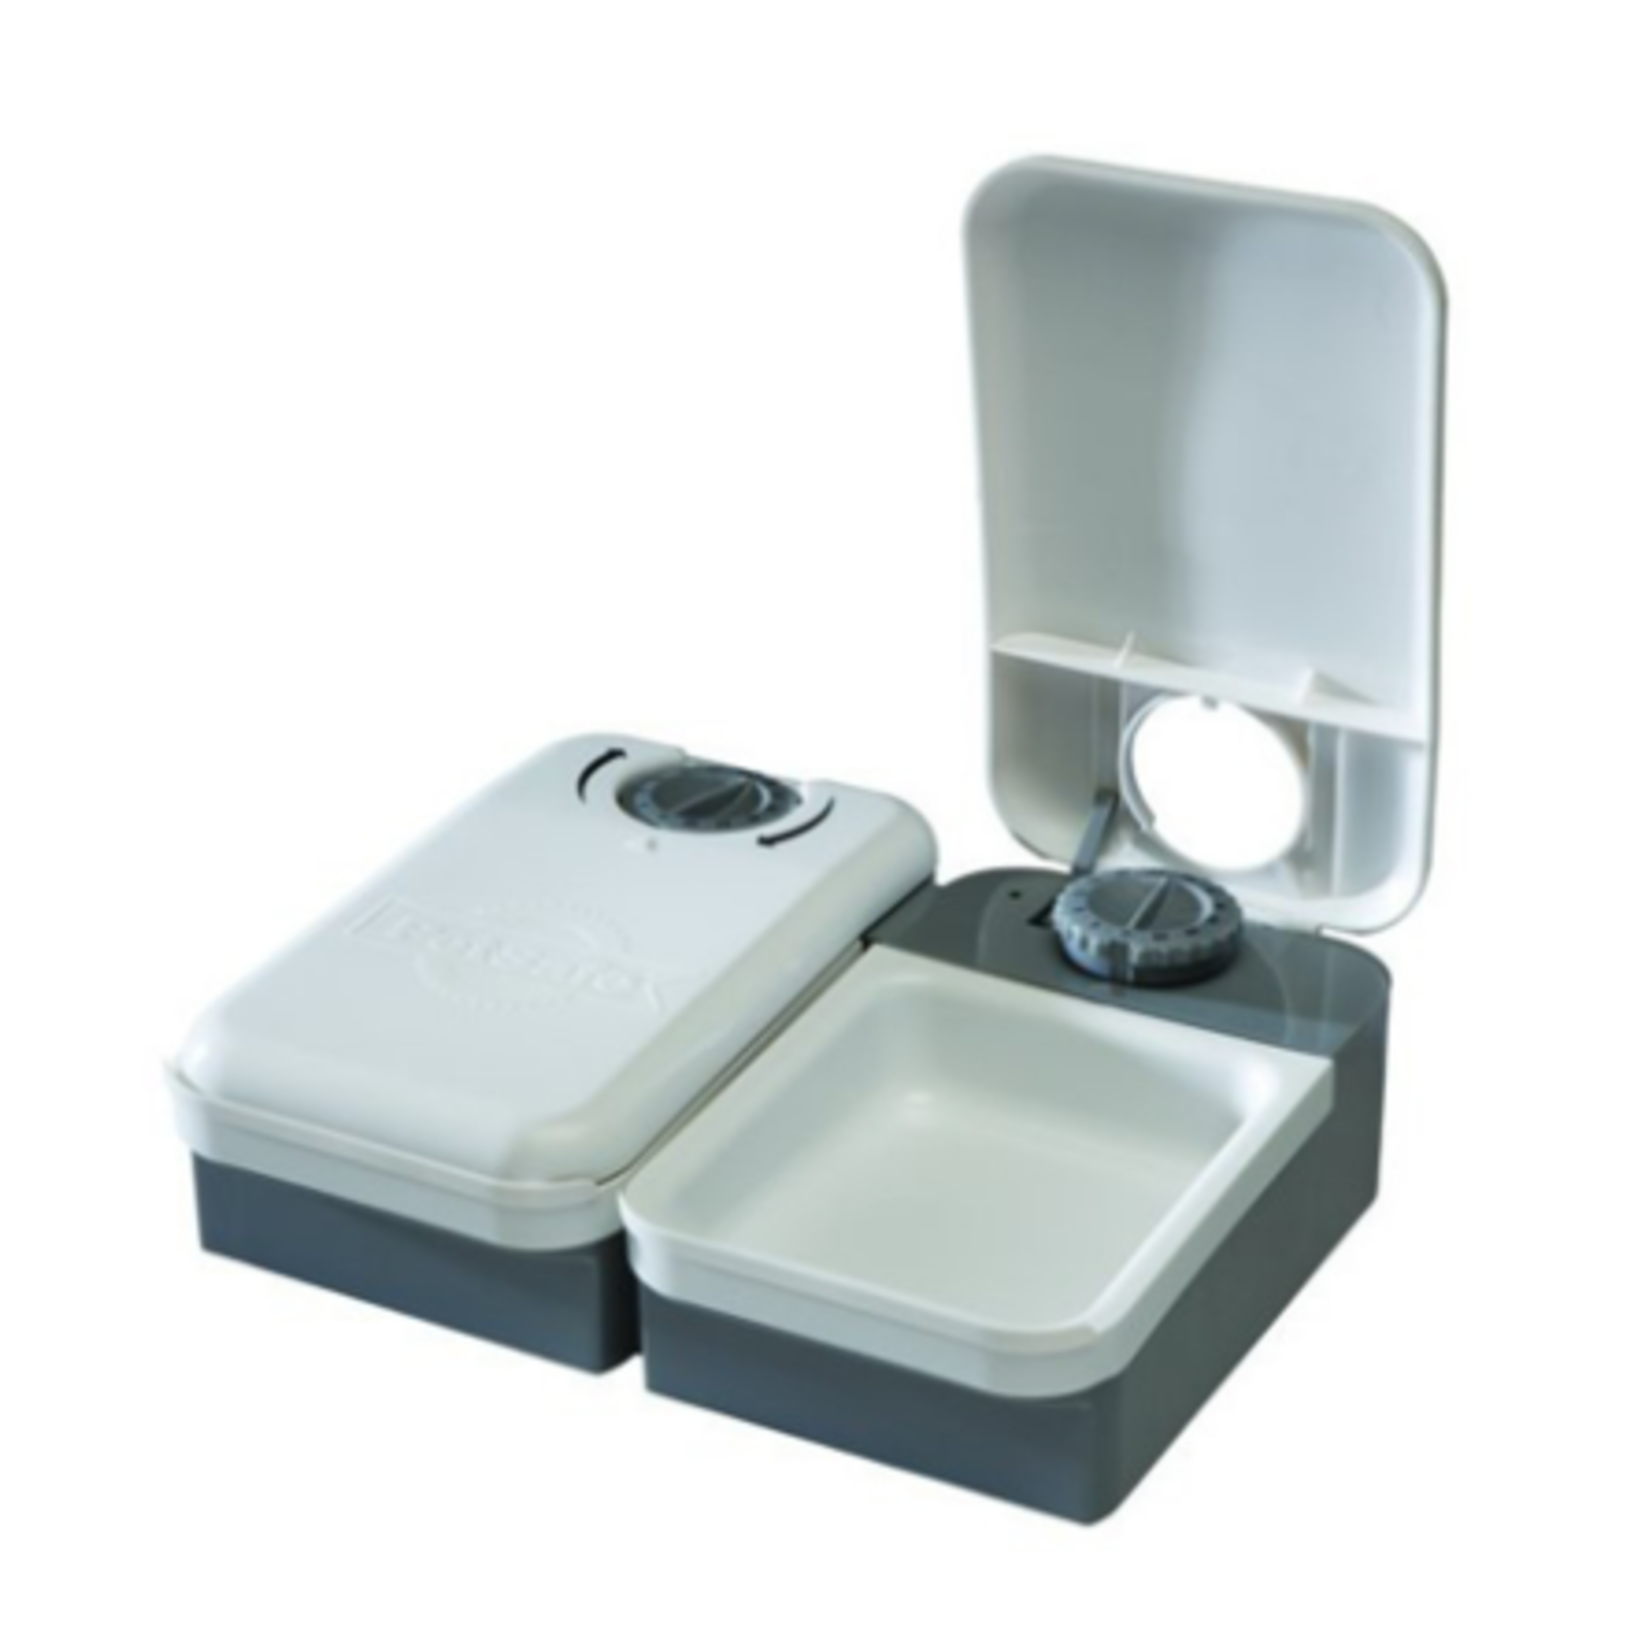 Eatwell Auto Feeder - 2 Servings